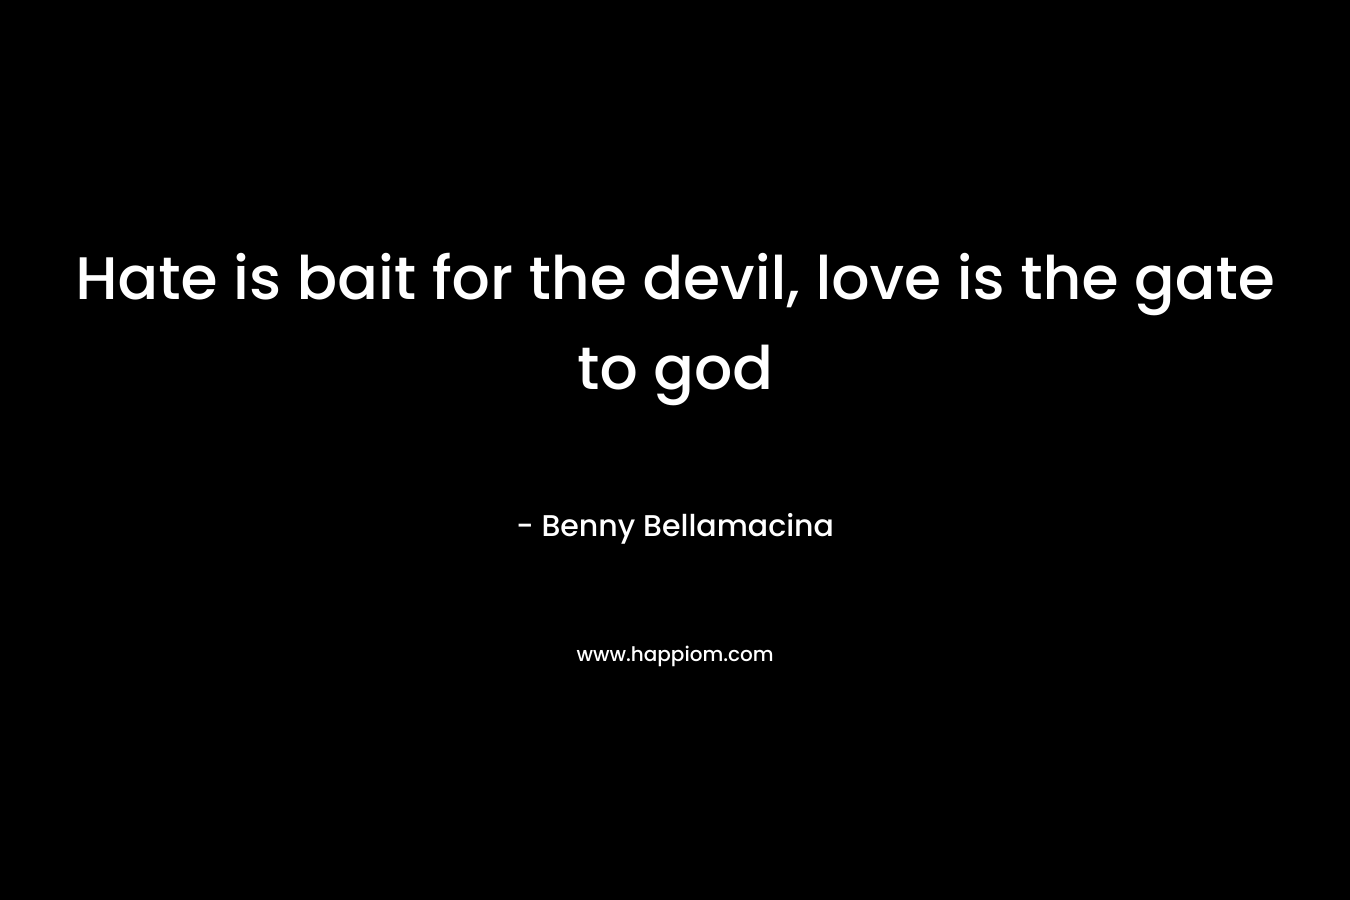 Hate is bait for the devil, love is the gate to god